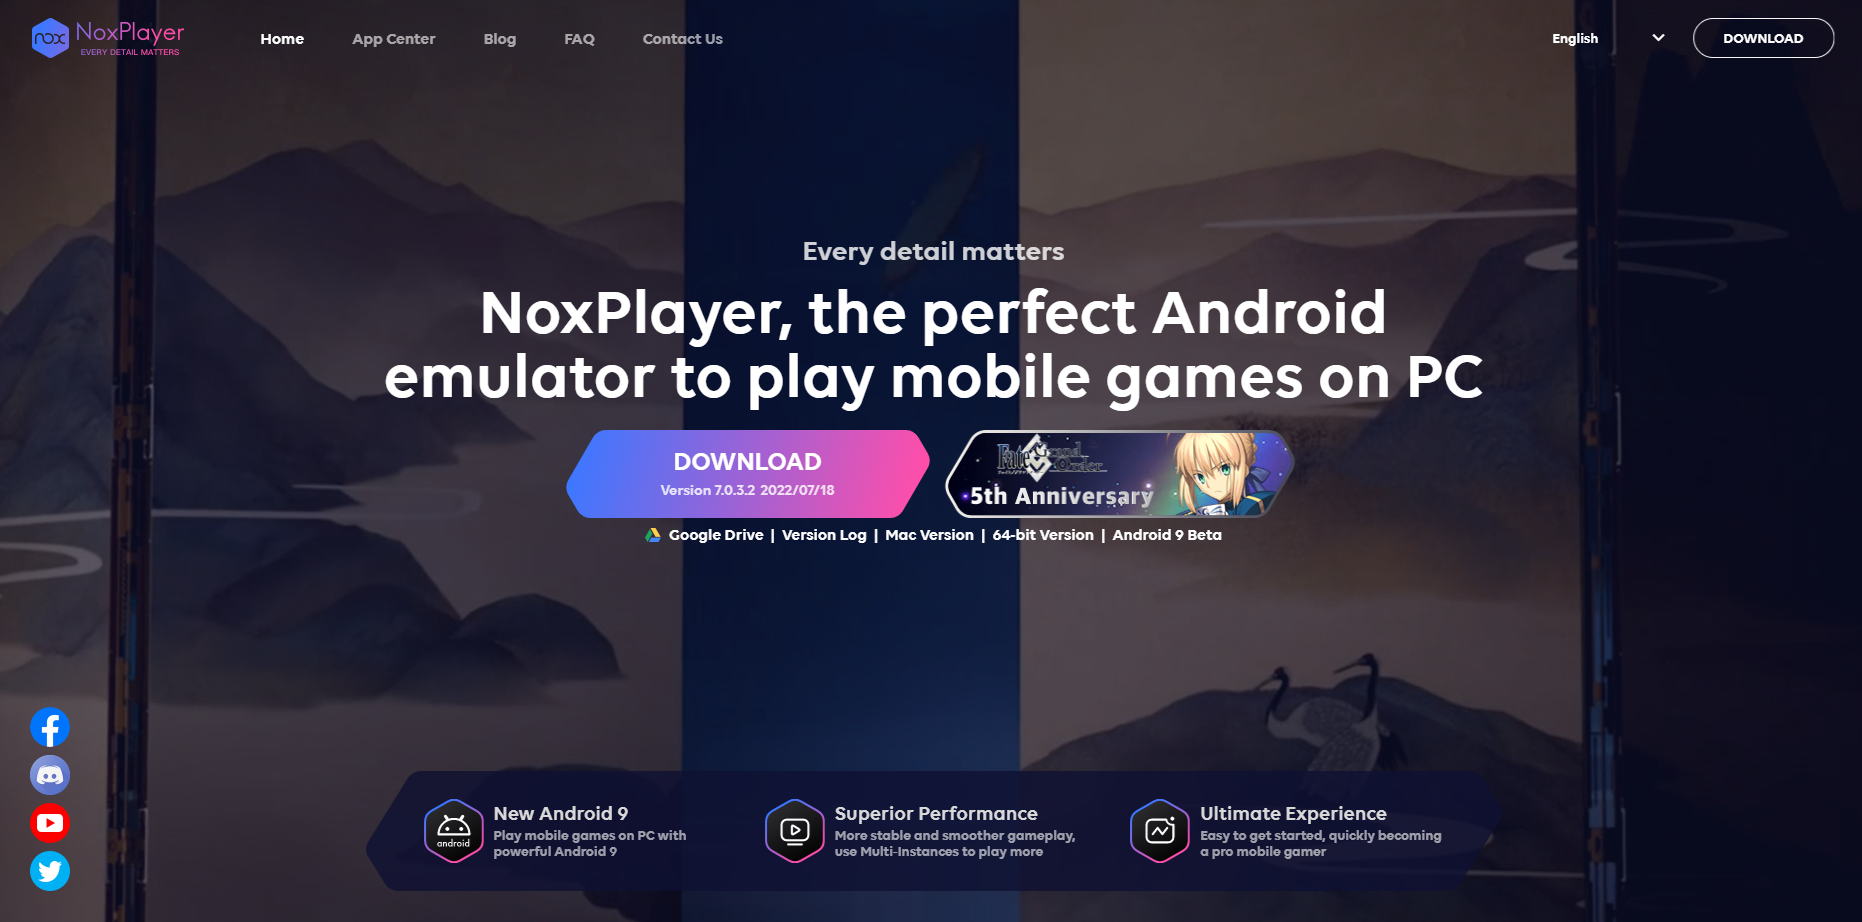 NoxPlayer Overview